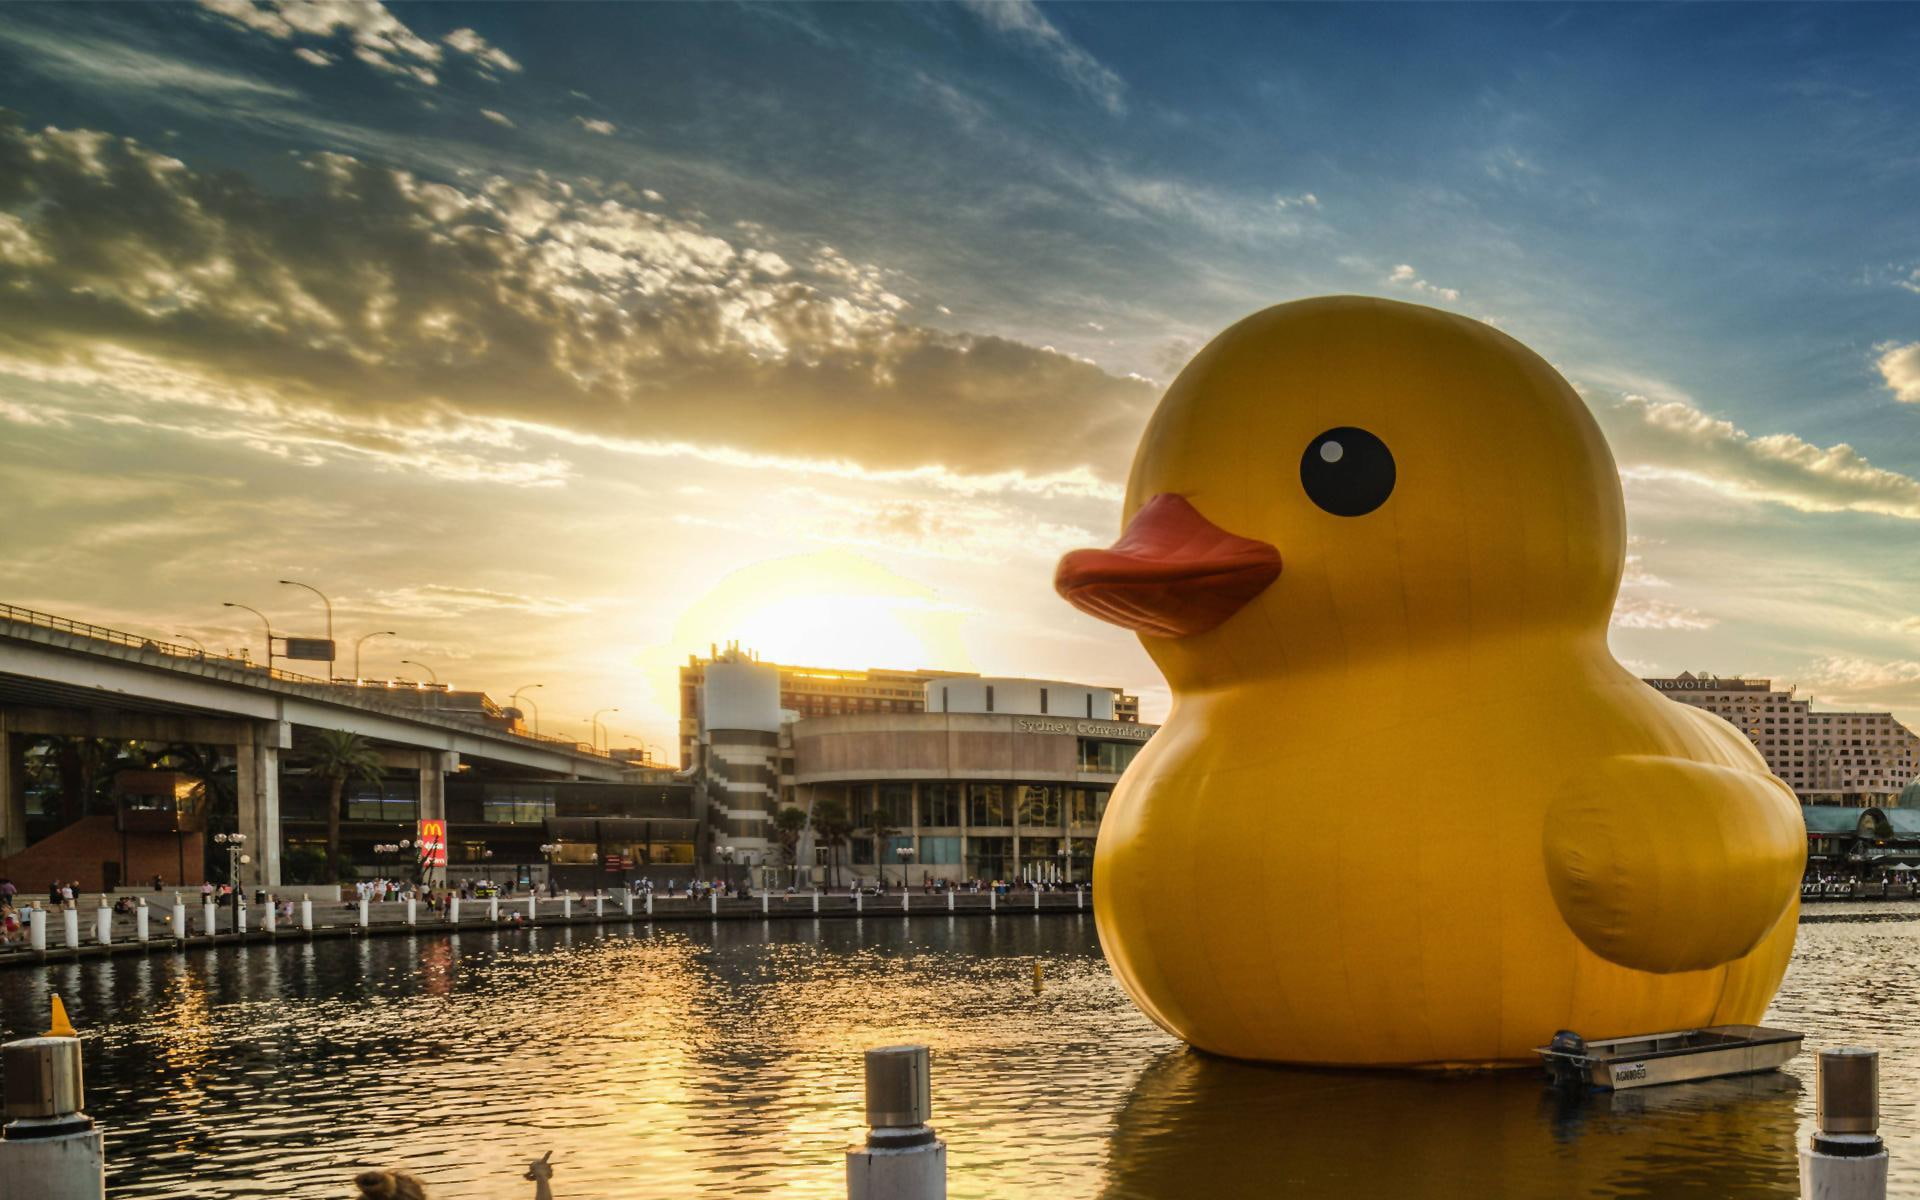 Rubber duck city, yellow inflatable baby duck, funny